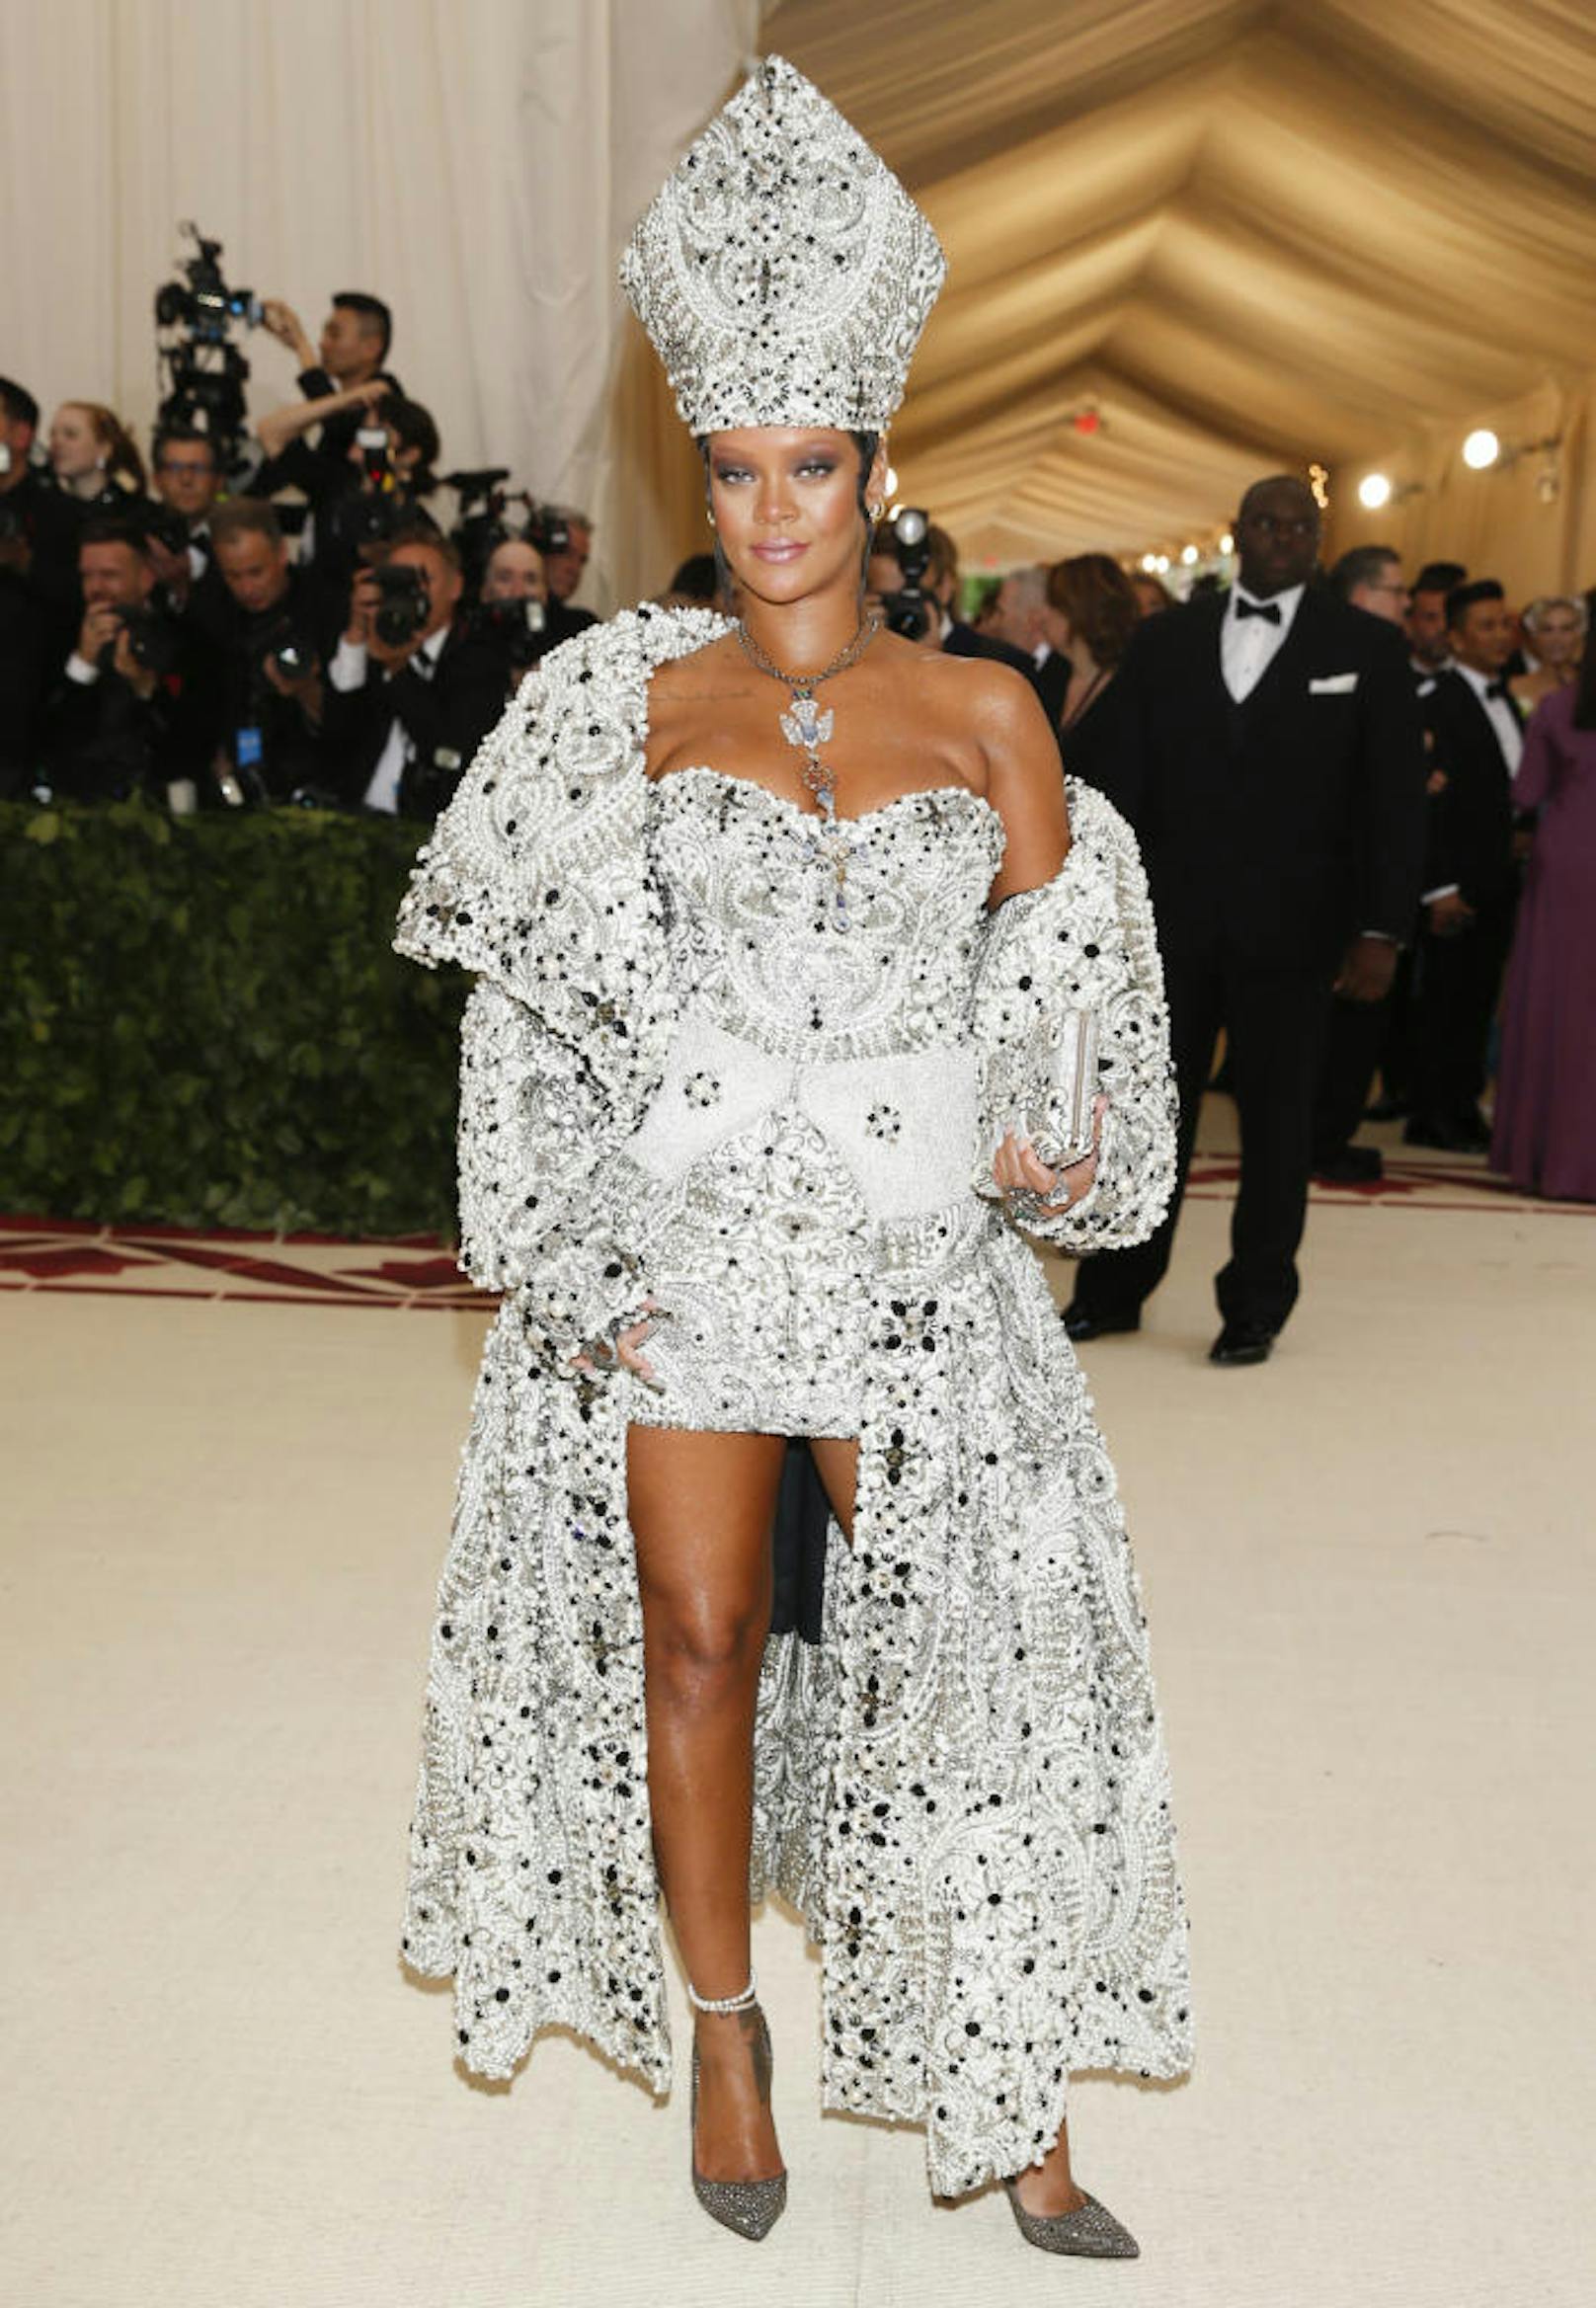 Singer Rihanna arrives at the Metropolitan Museum of Art Costume Institute Gala (Met Gala) to celebrate the opening of "Heavenly Bodies: Fashion and the Catholic Imagination" in the Manhattan borough of New York, U.S., May 7, 2018. REUTERS/Carlo Allegri - HP1EE571T100X